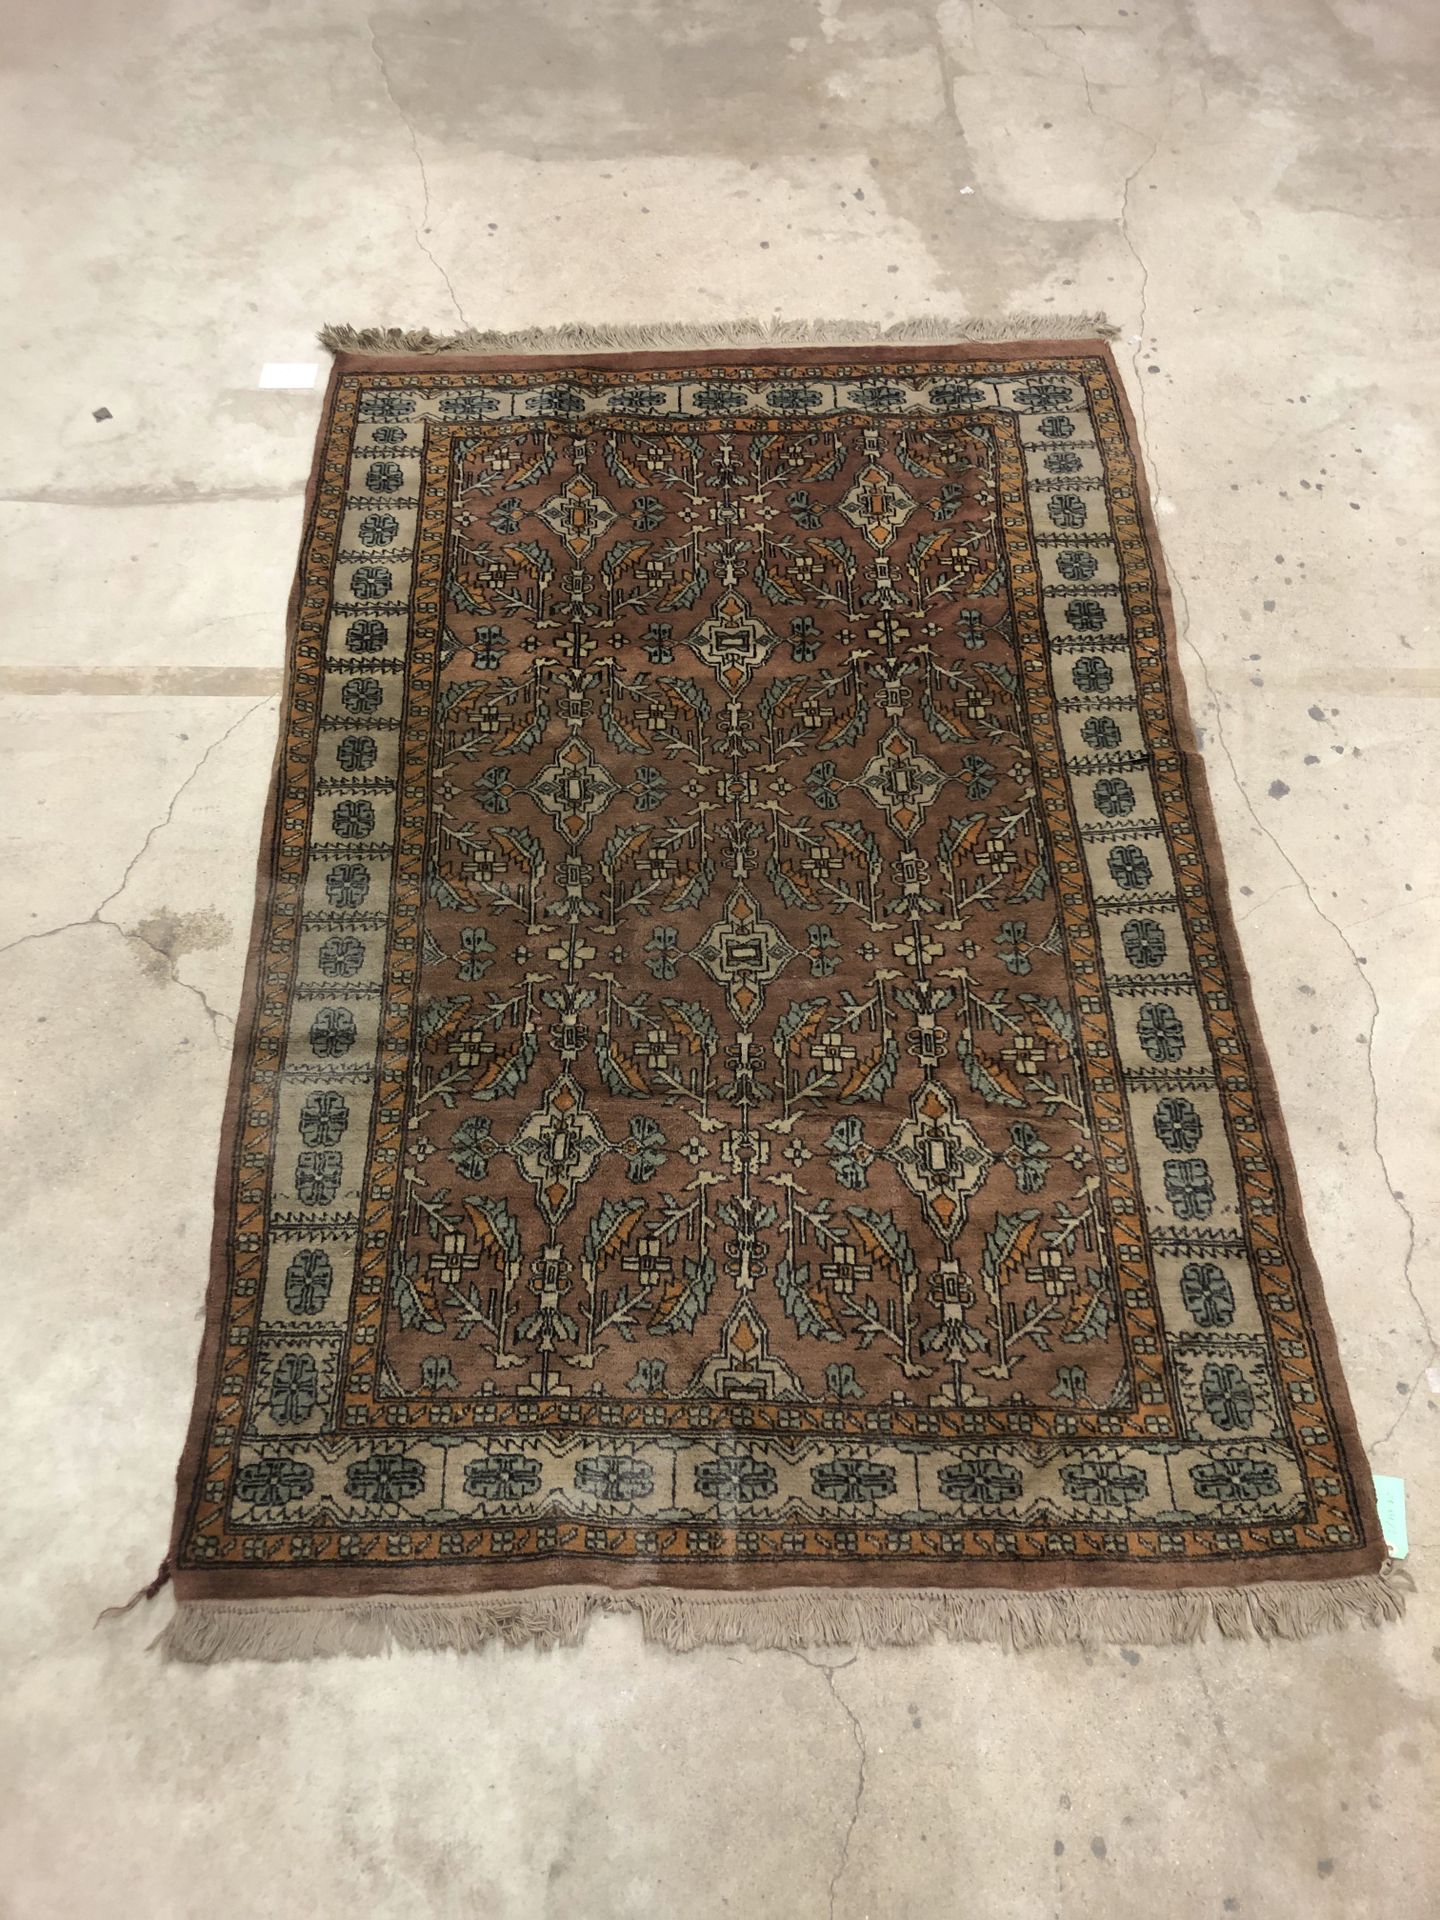 Null Brown wool carpet with floral design, beige border